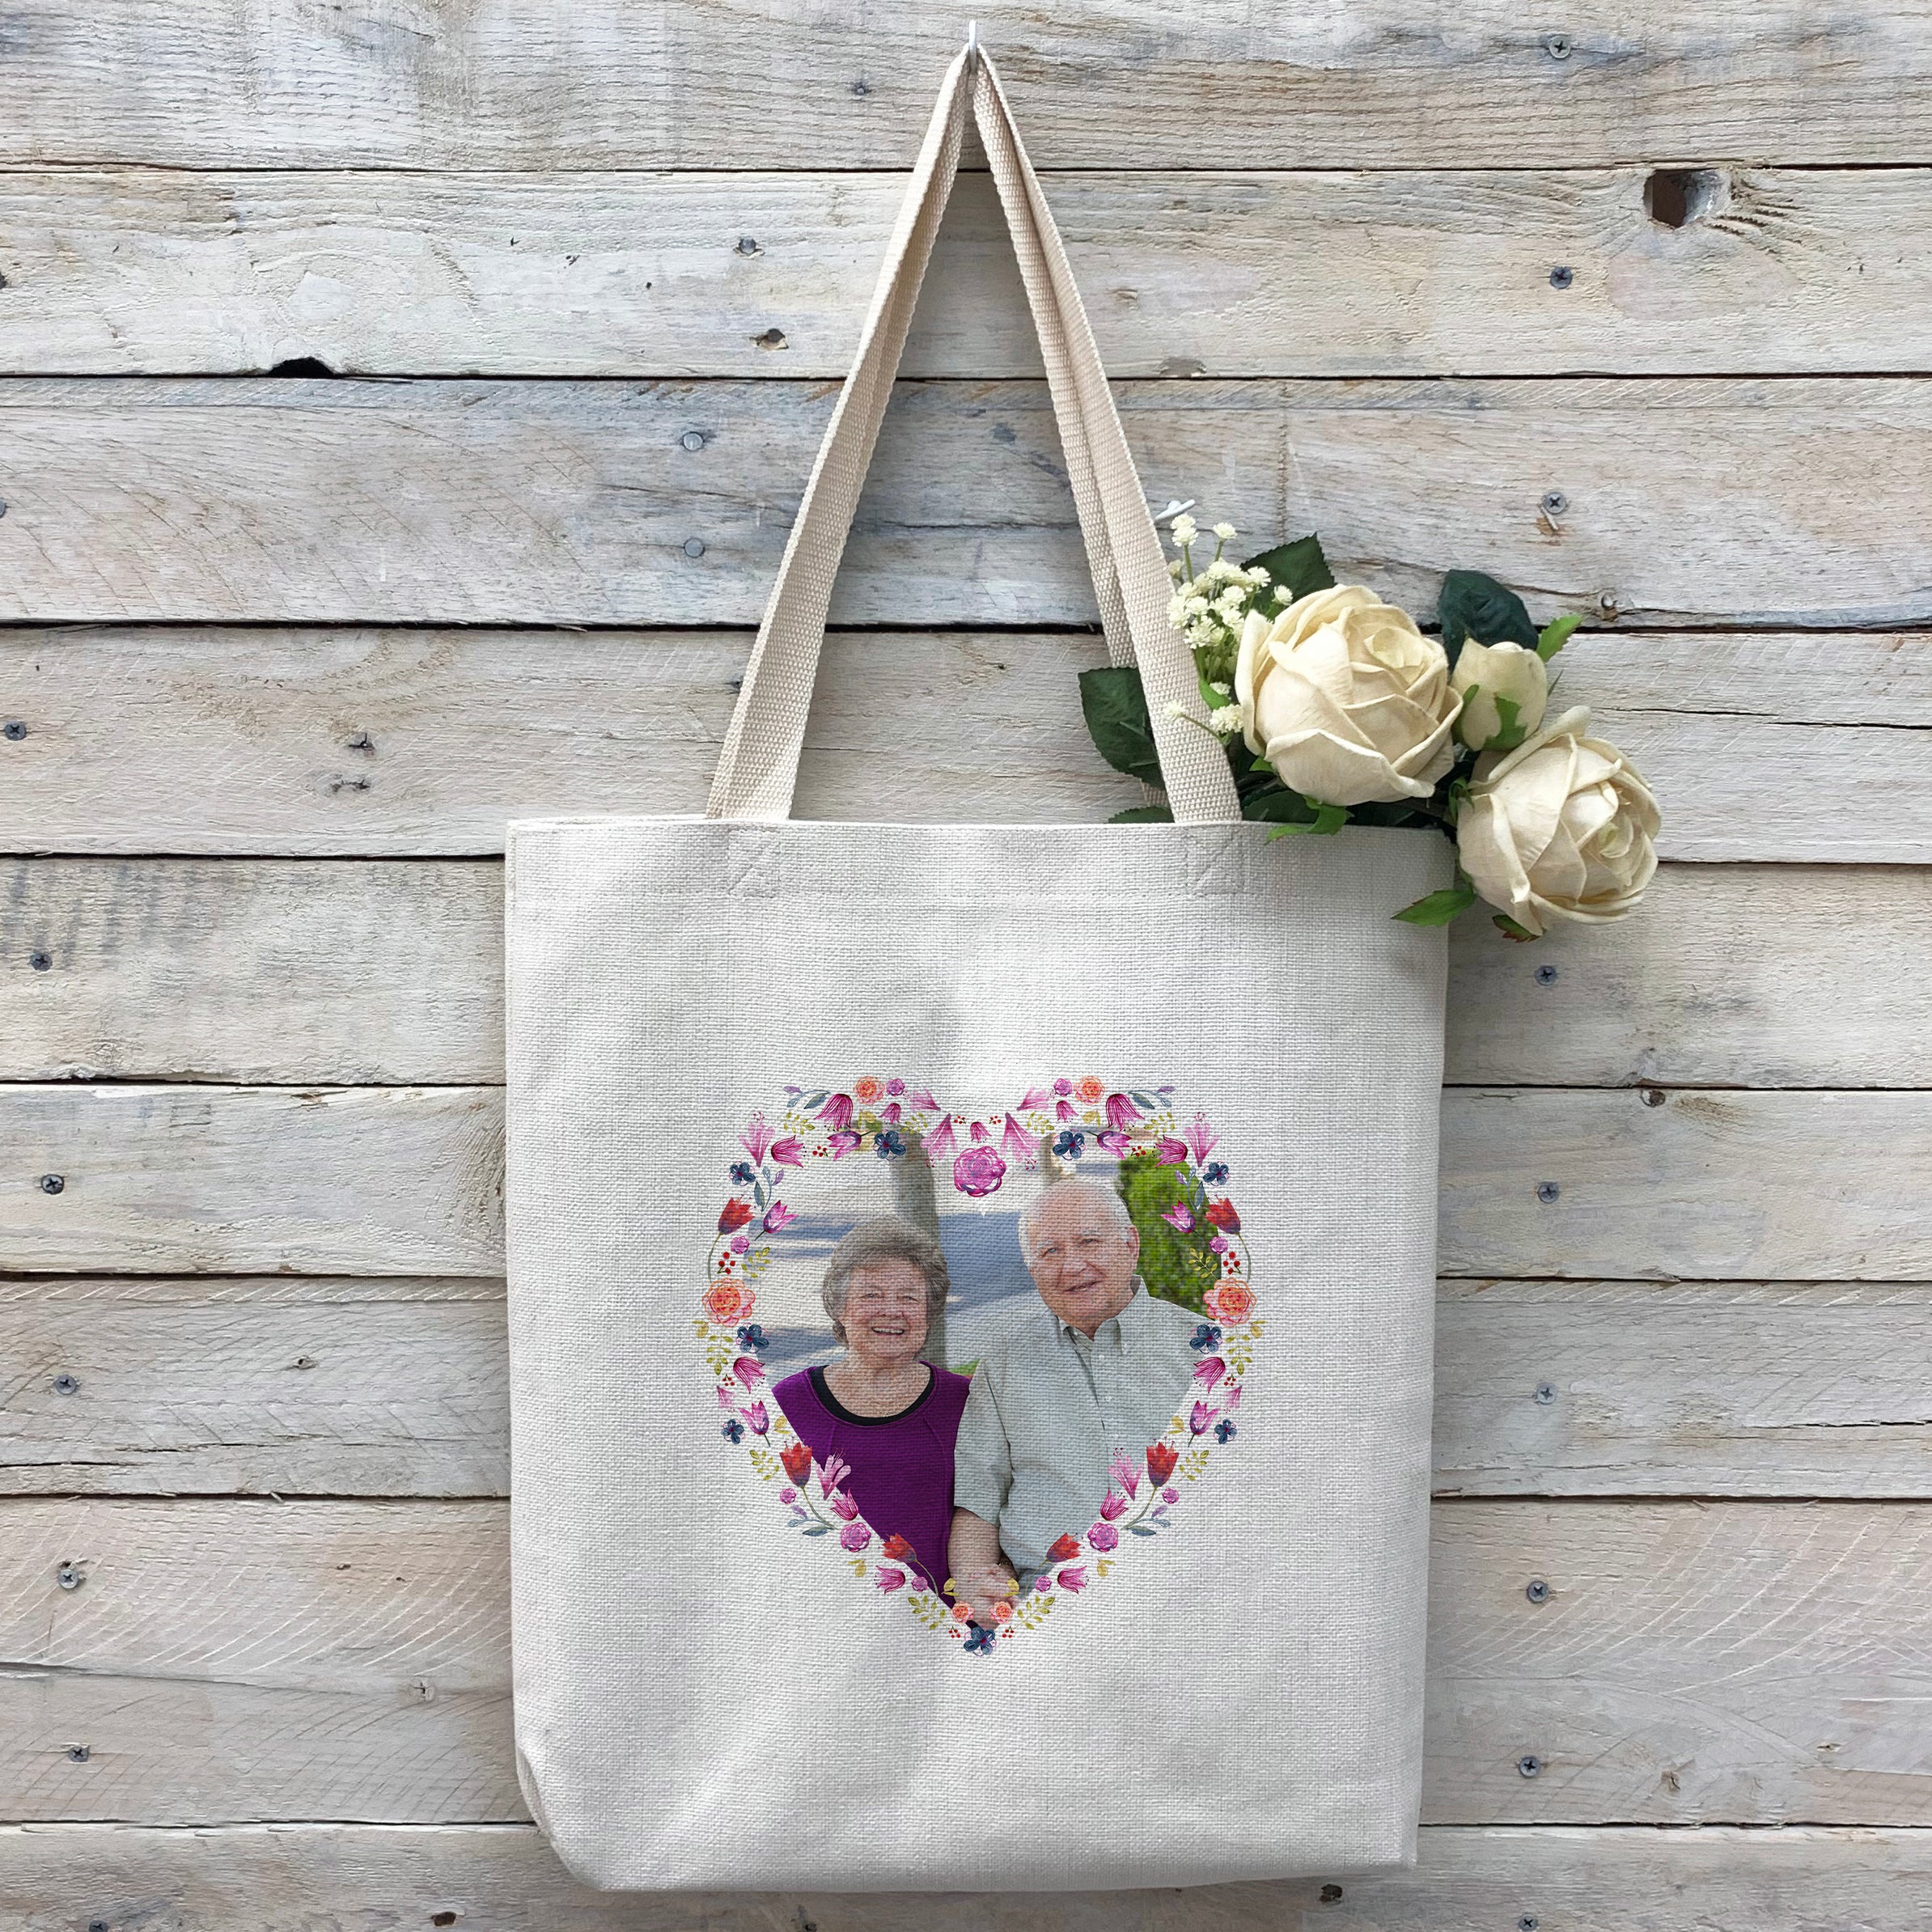 Personalized Tote Bags & Custom Canvas Totes